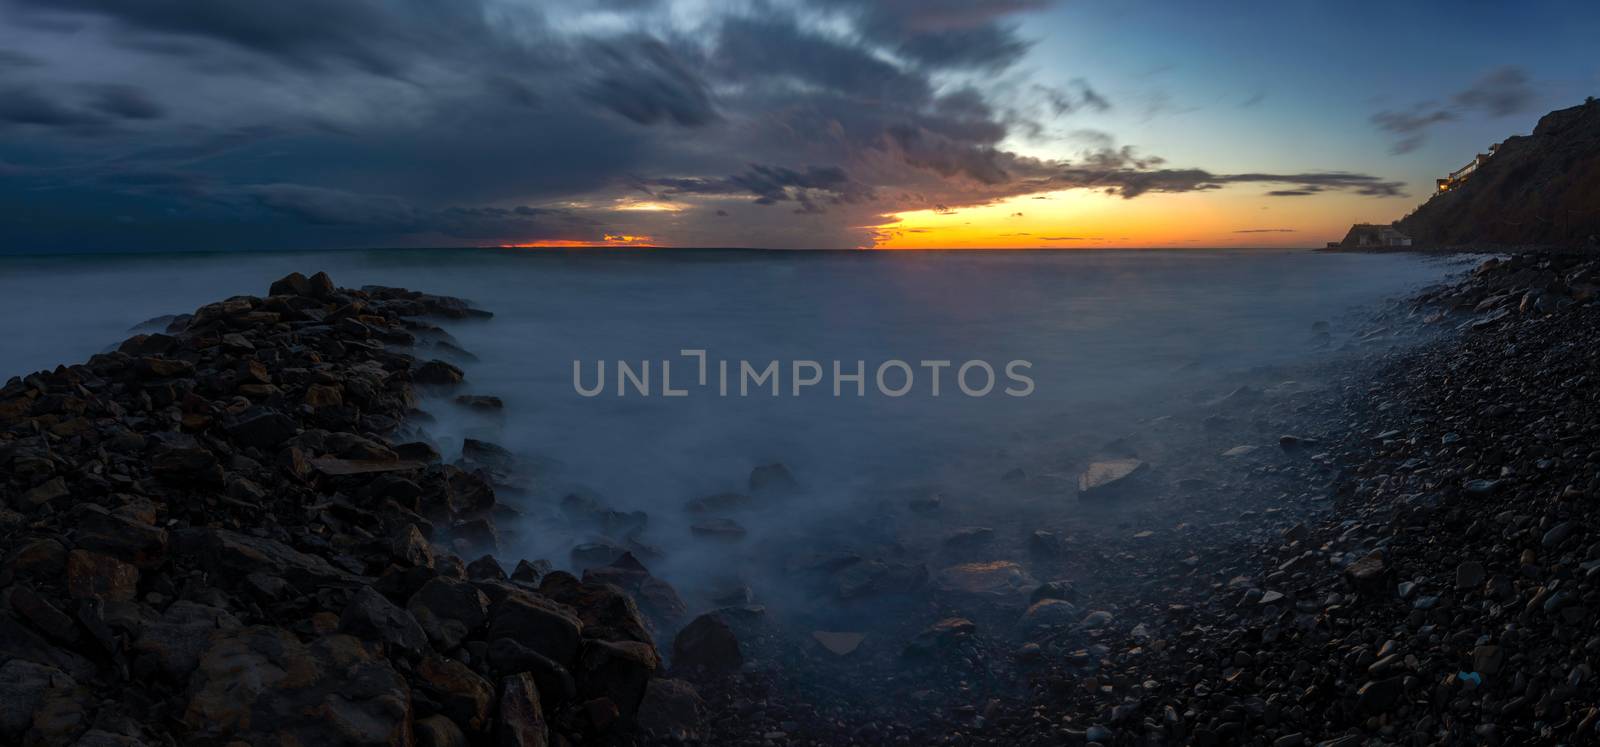 Panorama of three frames a general view of the rocky shore of the Black Sea coast after sunset, Anapa, Russia by Madhourse